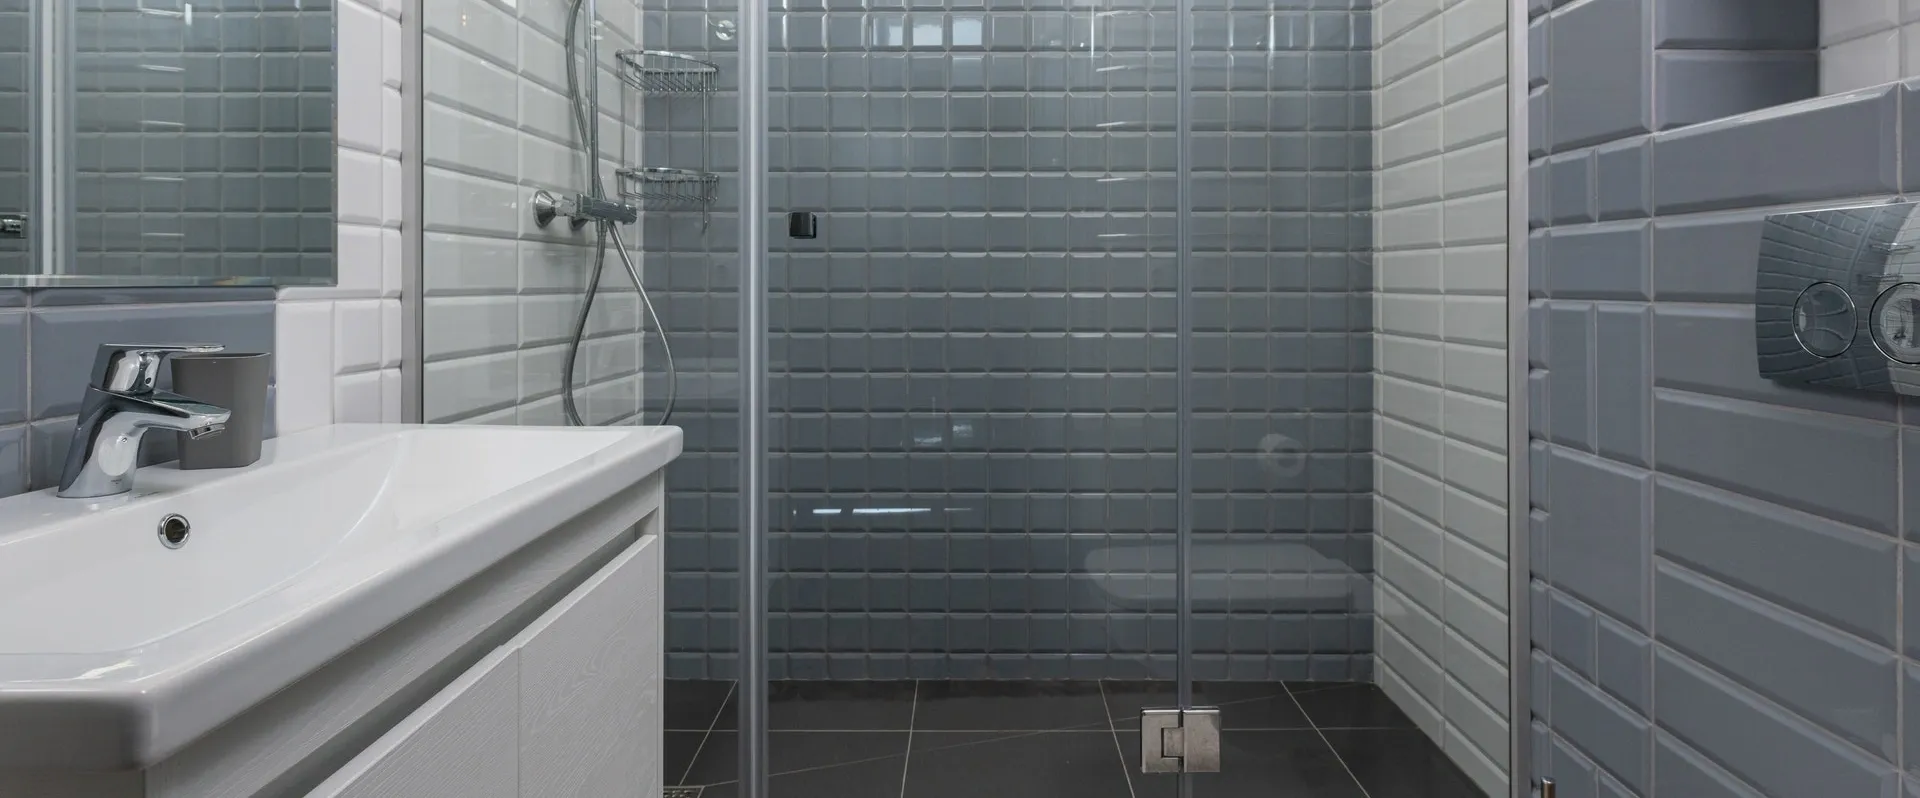 A bathroom with a shower and tiled walls.